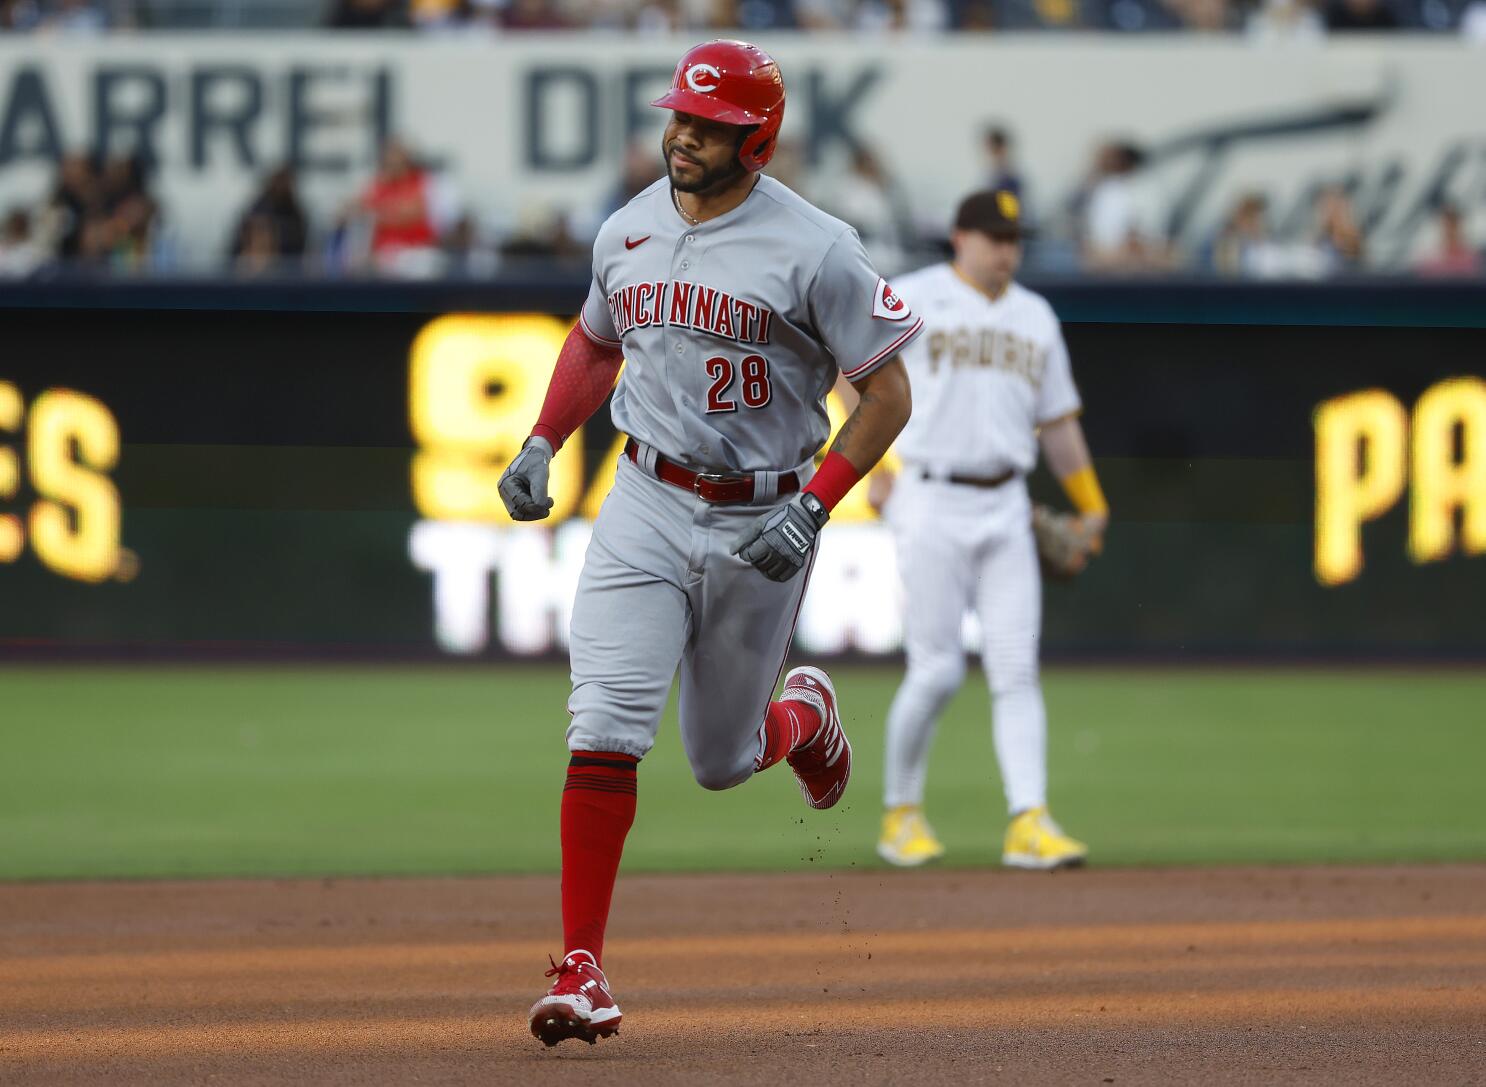 Tommy Pham's numbers this year are right in the ballpark of some